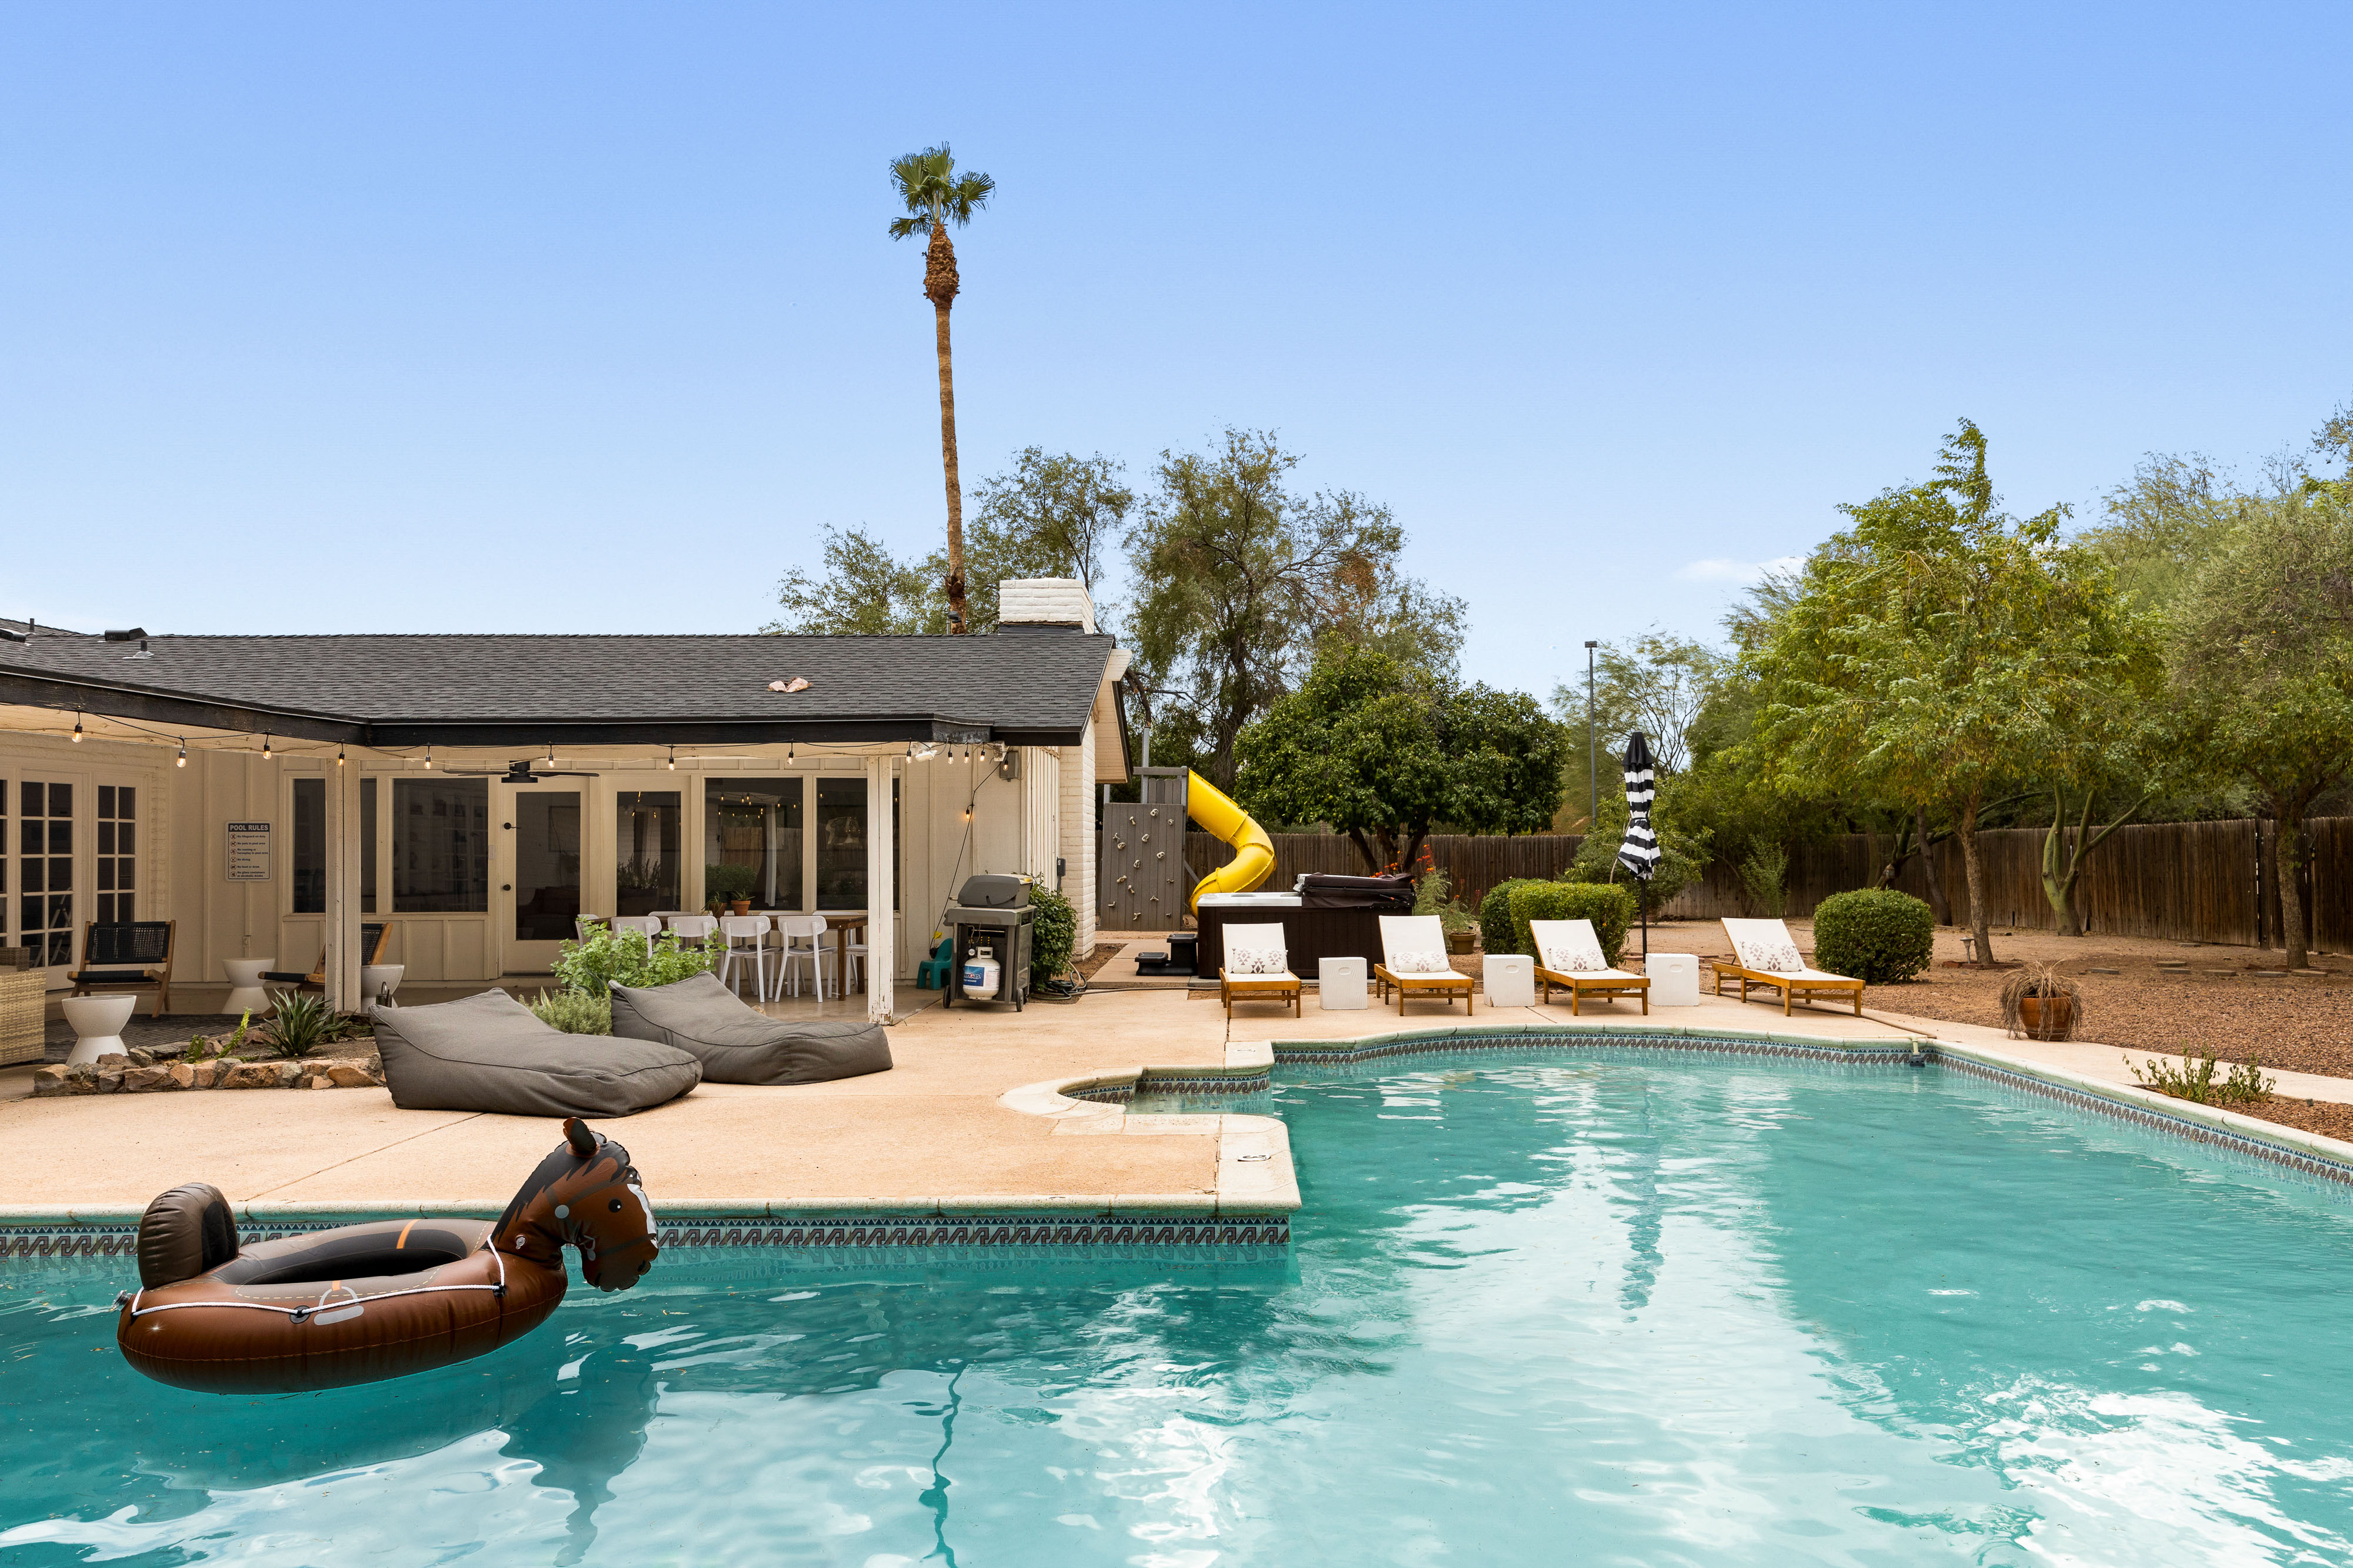 Relax in the Outdoor Pool Area w/ Poolside Lounge Beds!